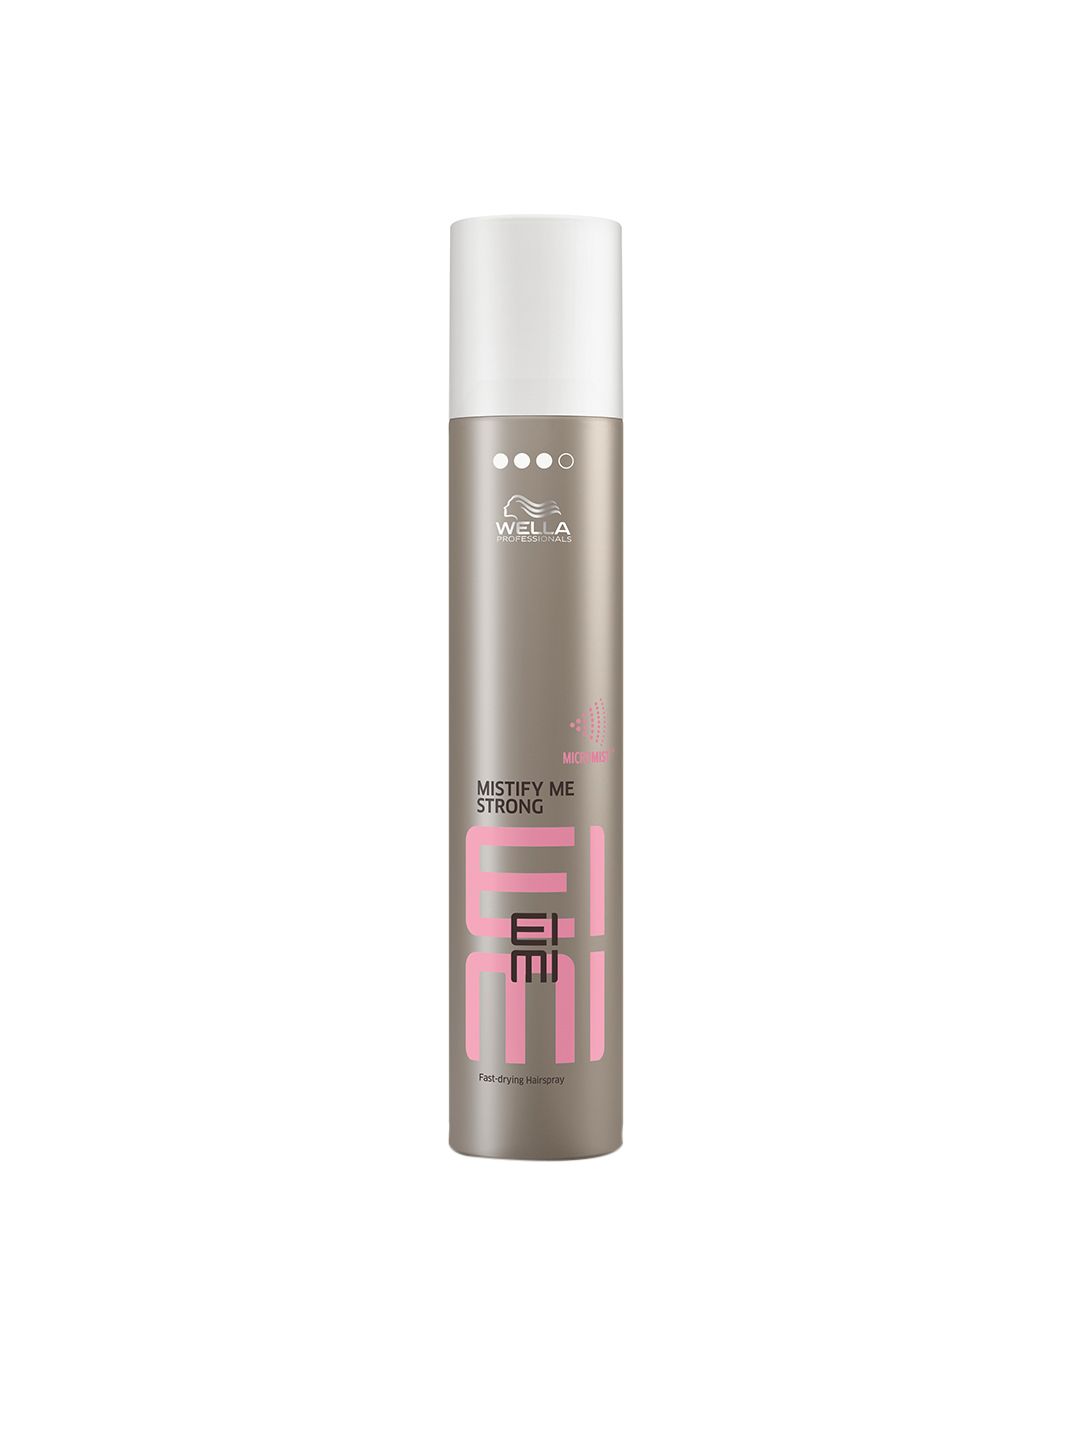 WELLA PROFESSIONALS Stay Styled Finishing Spray Price in India